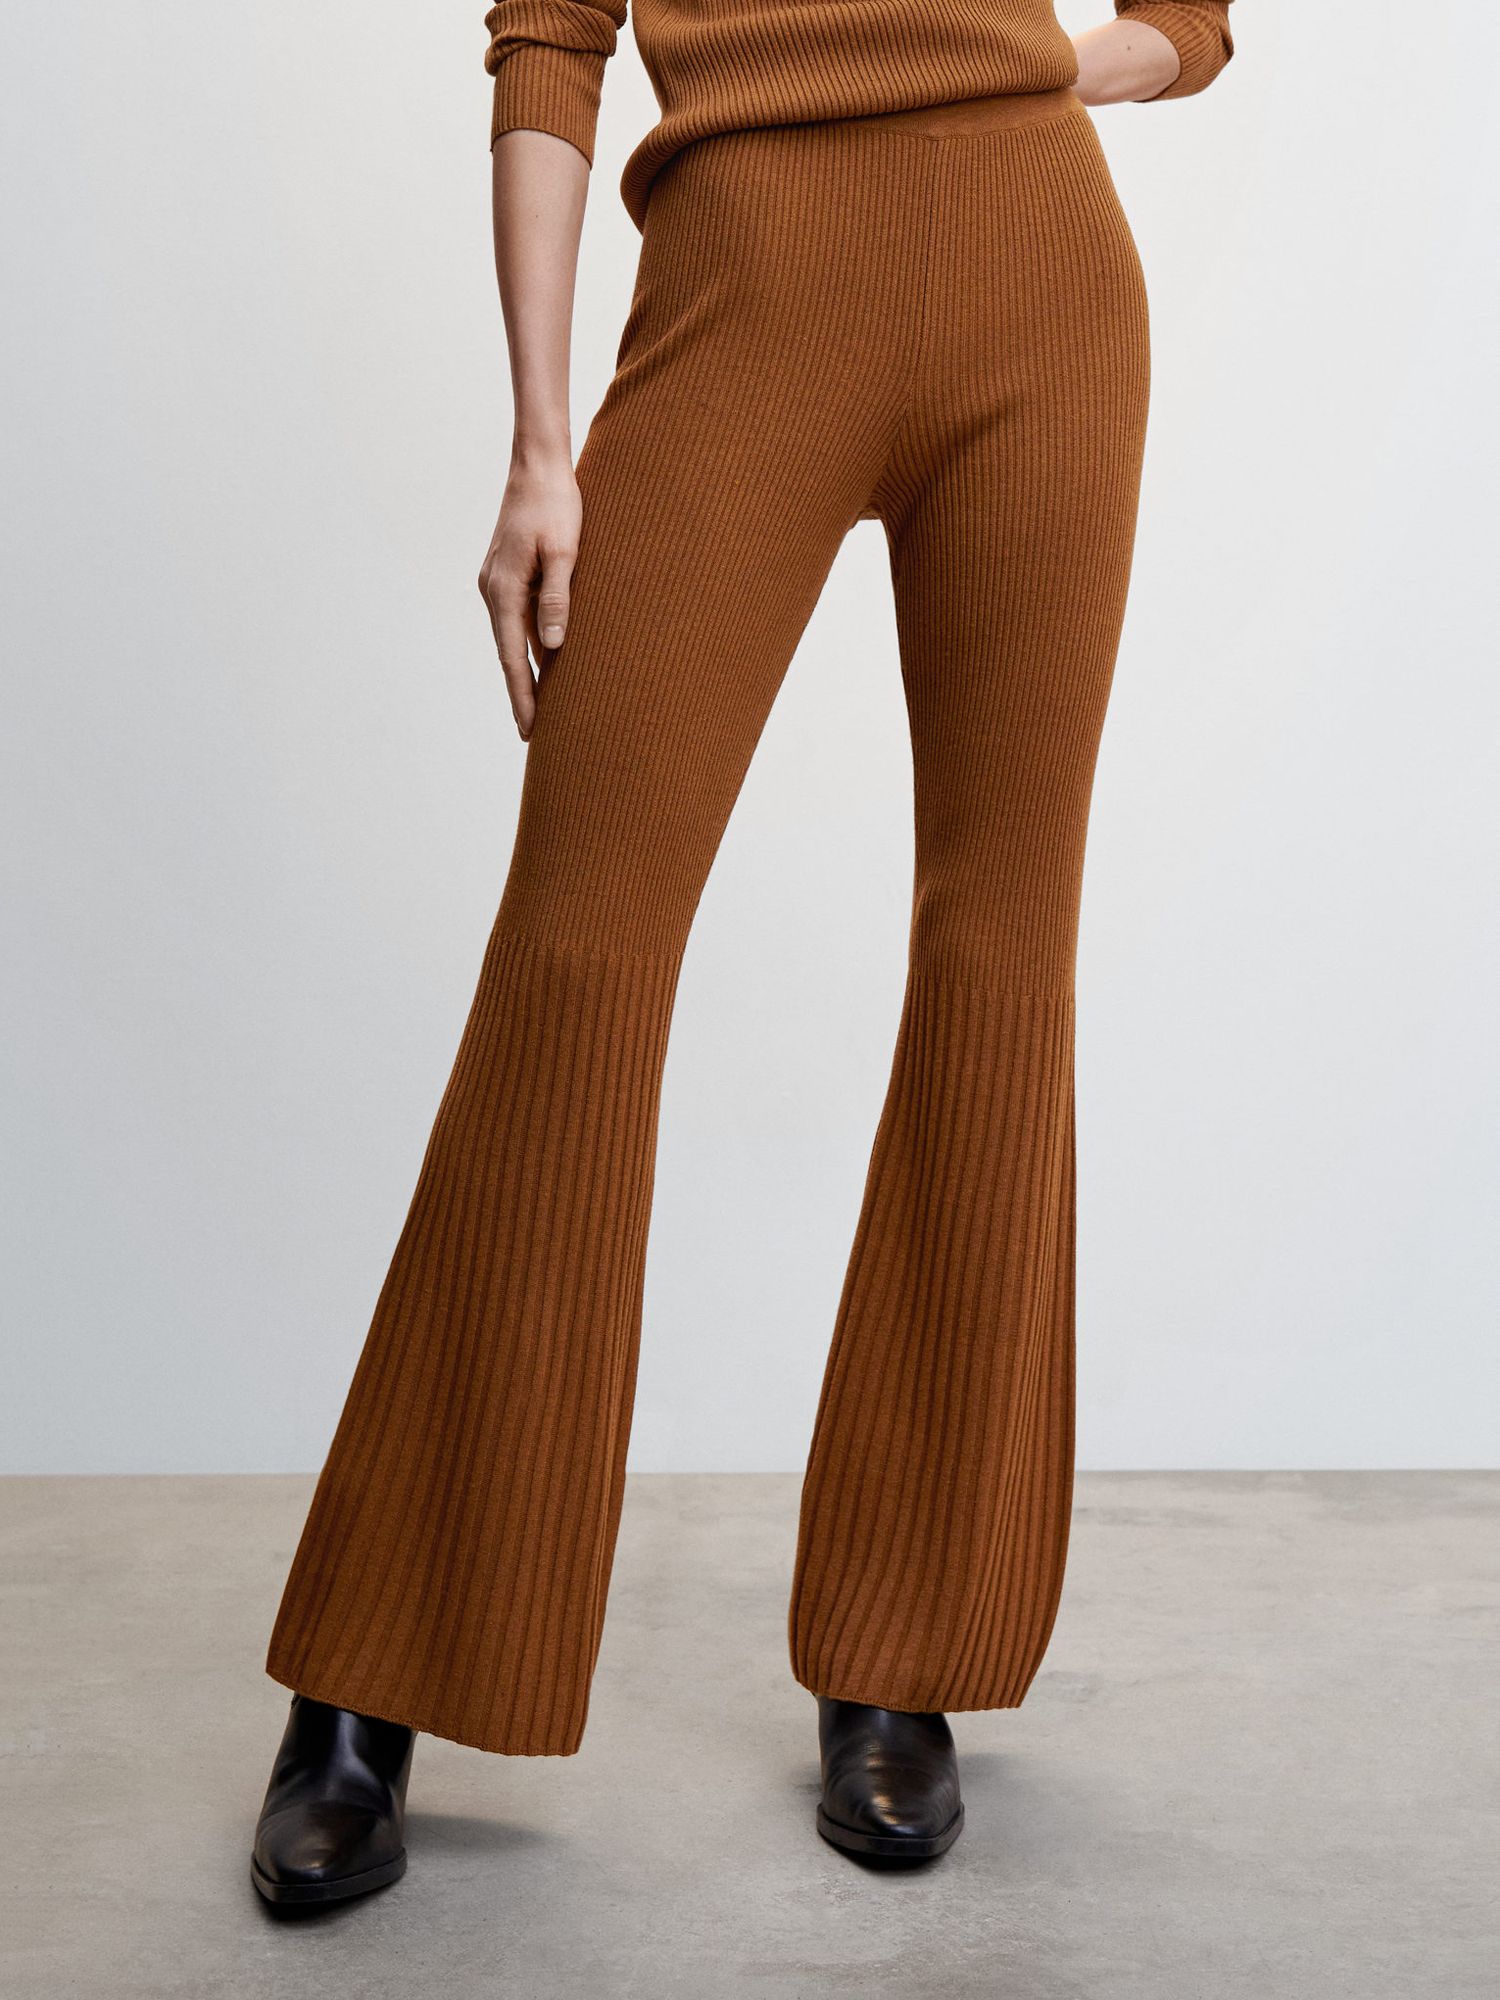 Crossover Rib Pant  Pants, Ribbed fabric, How to wear